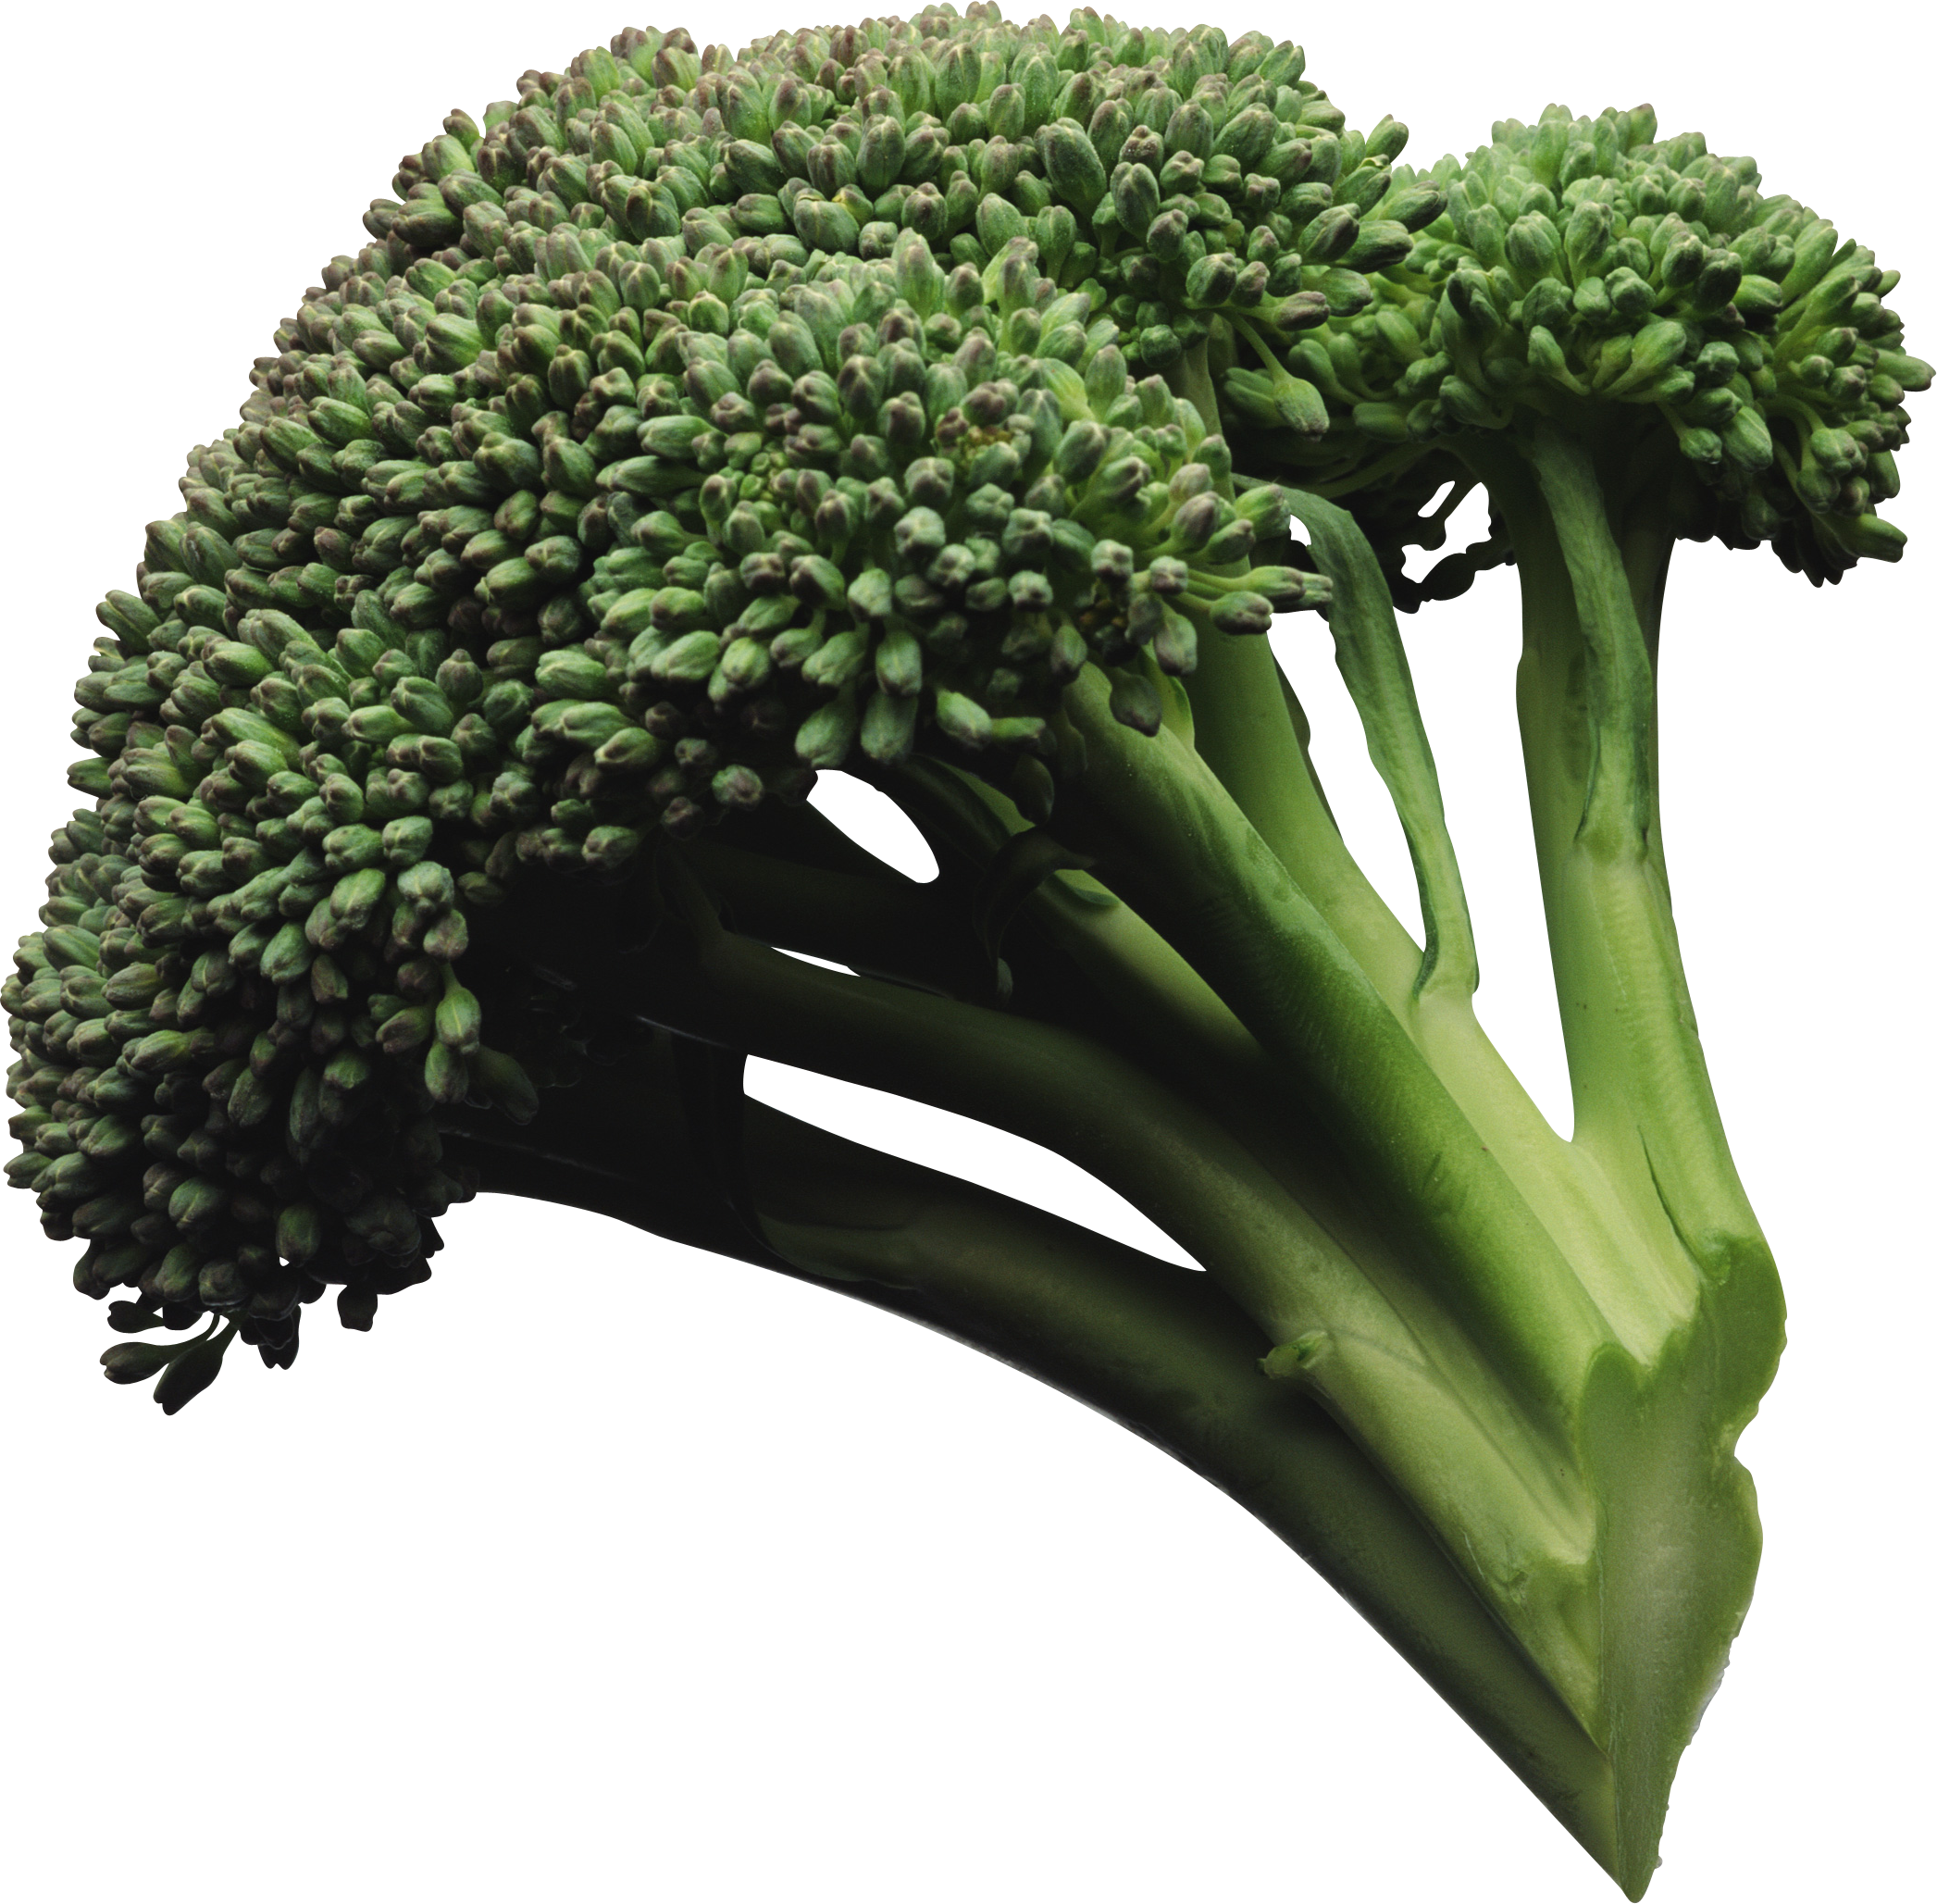 Icon web icons png. Clipart vegetables broccoli